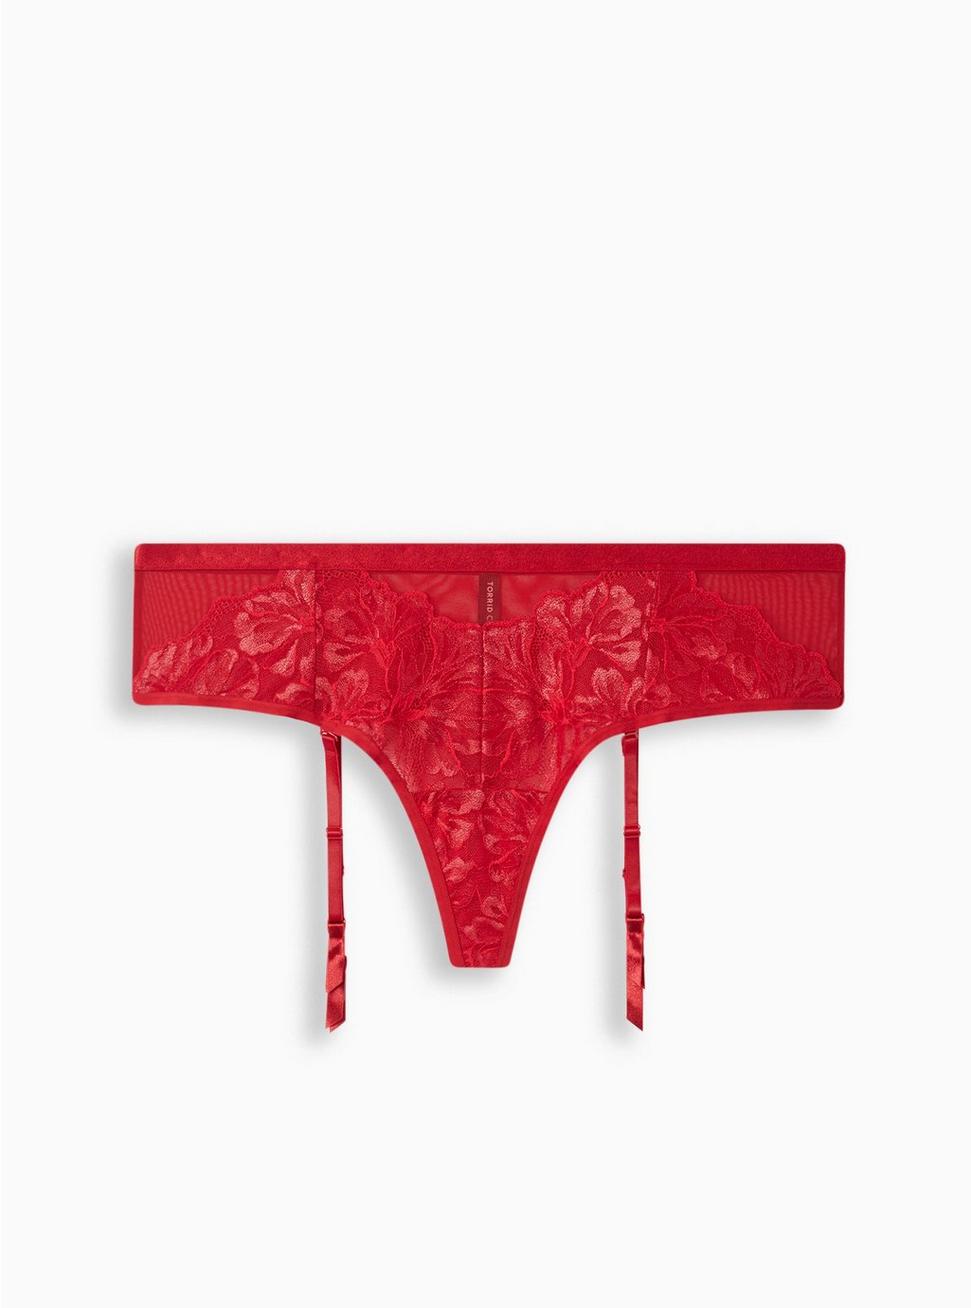 Shimmer Lace Mid Rise Thong Panty, JESTER RED, hi-res